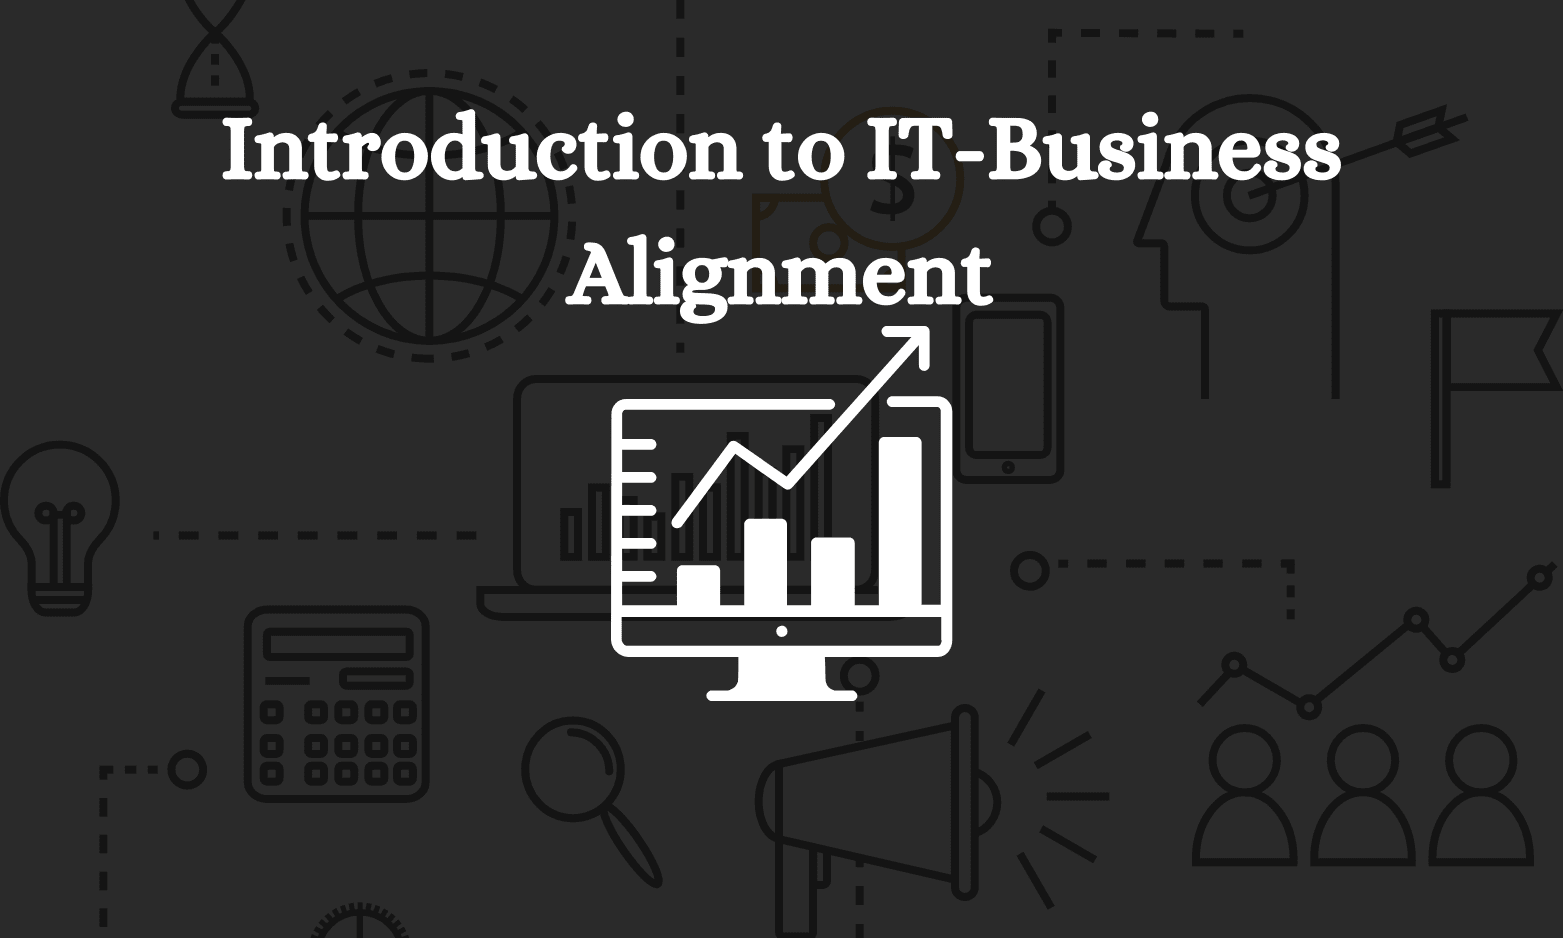 Introduction to IT-Business Alignment